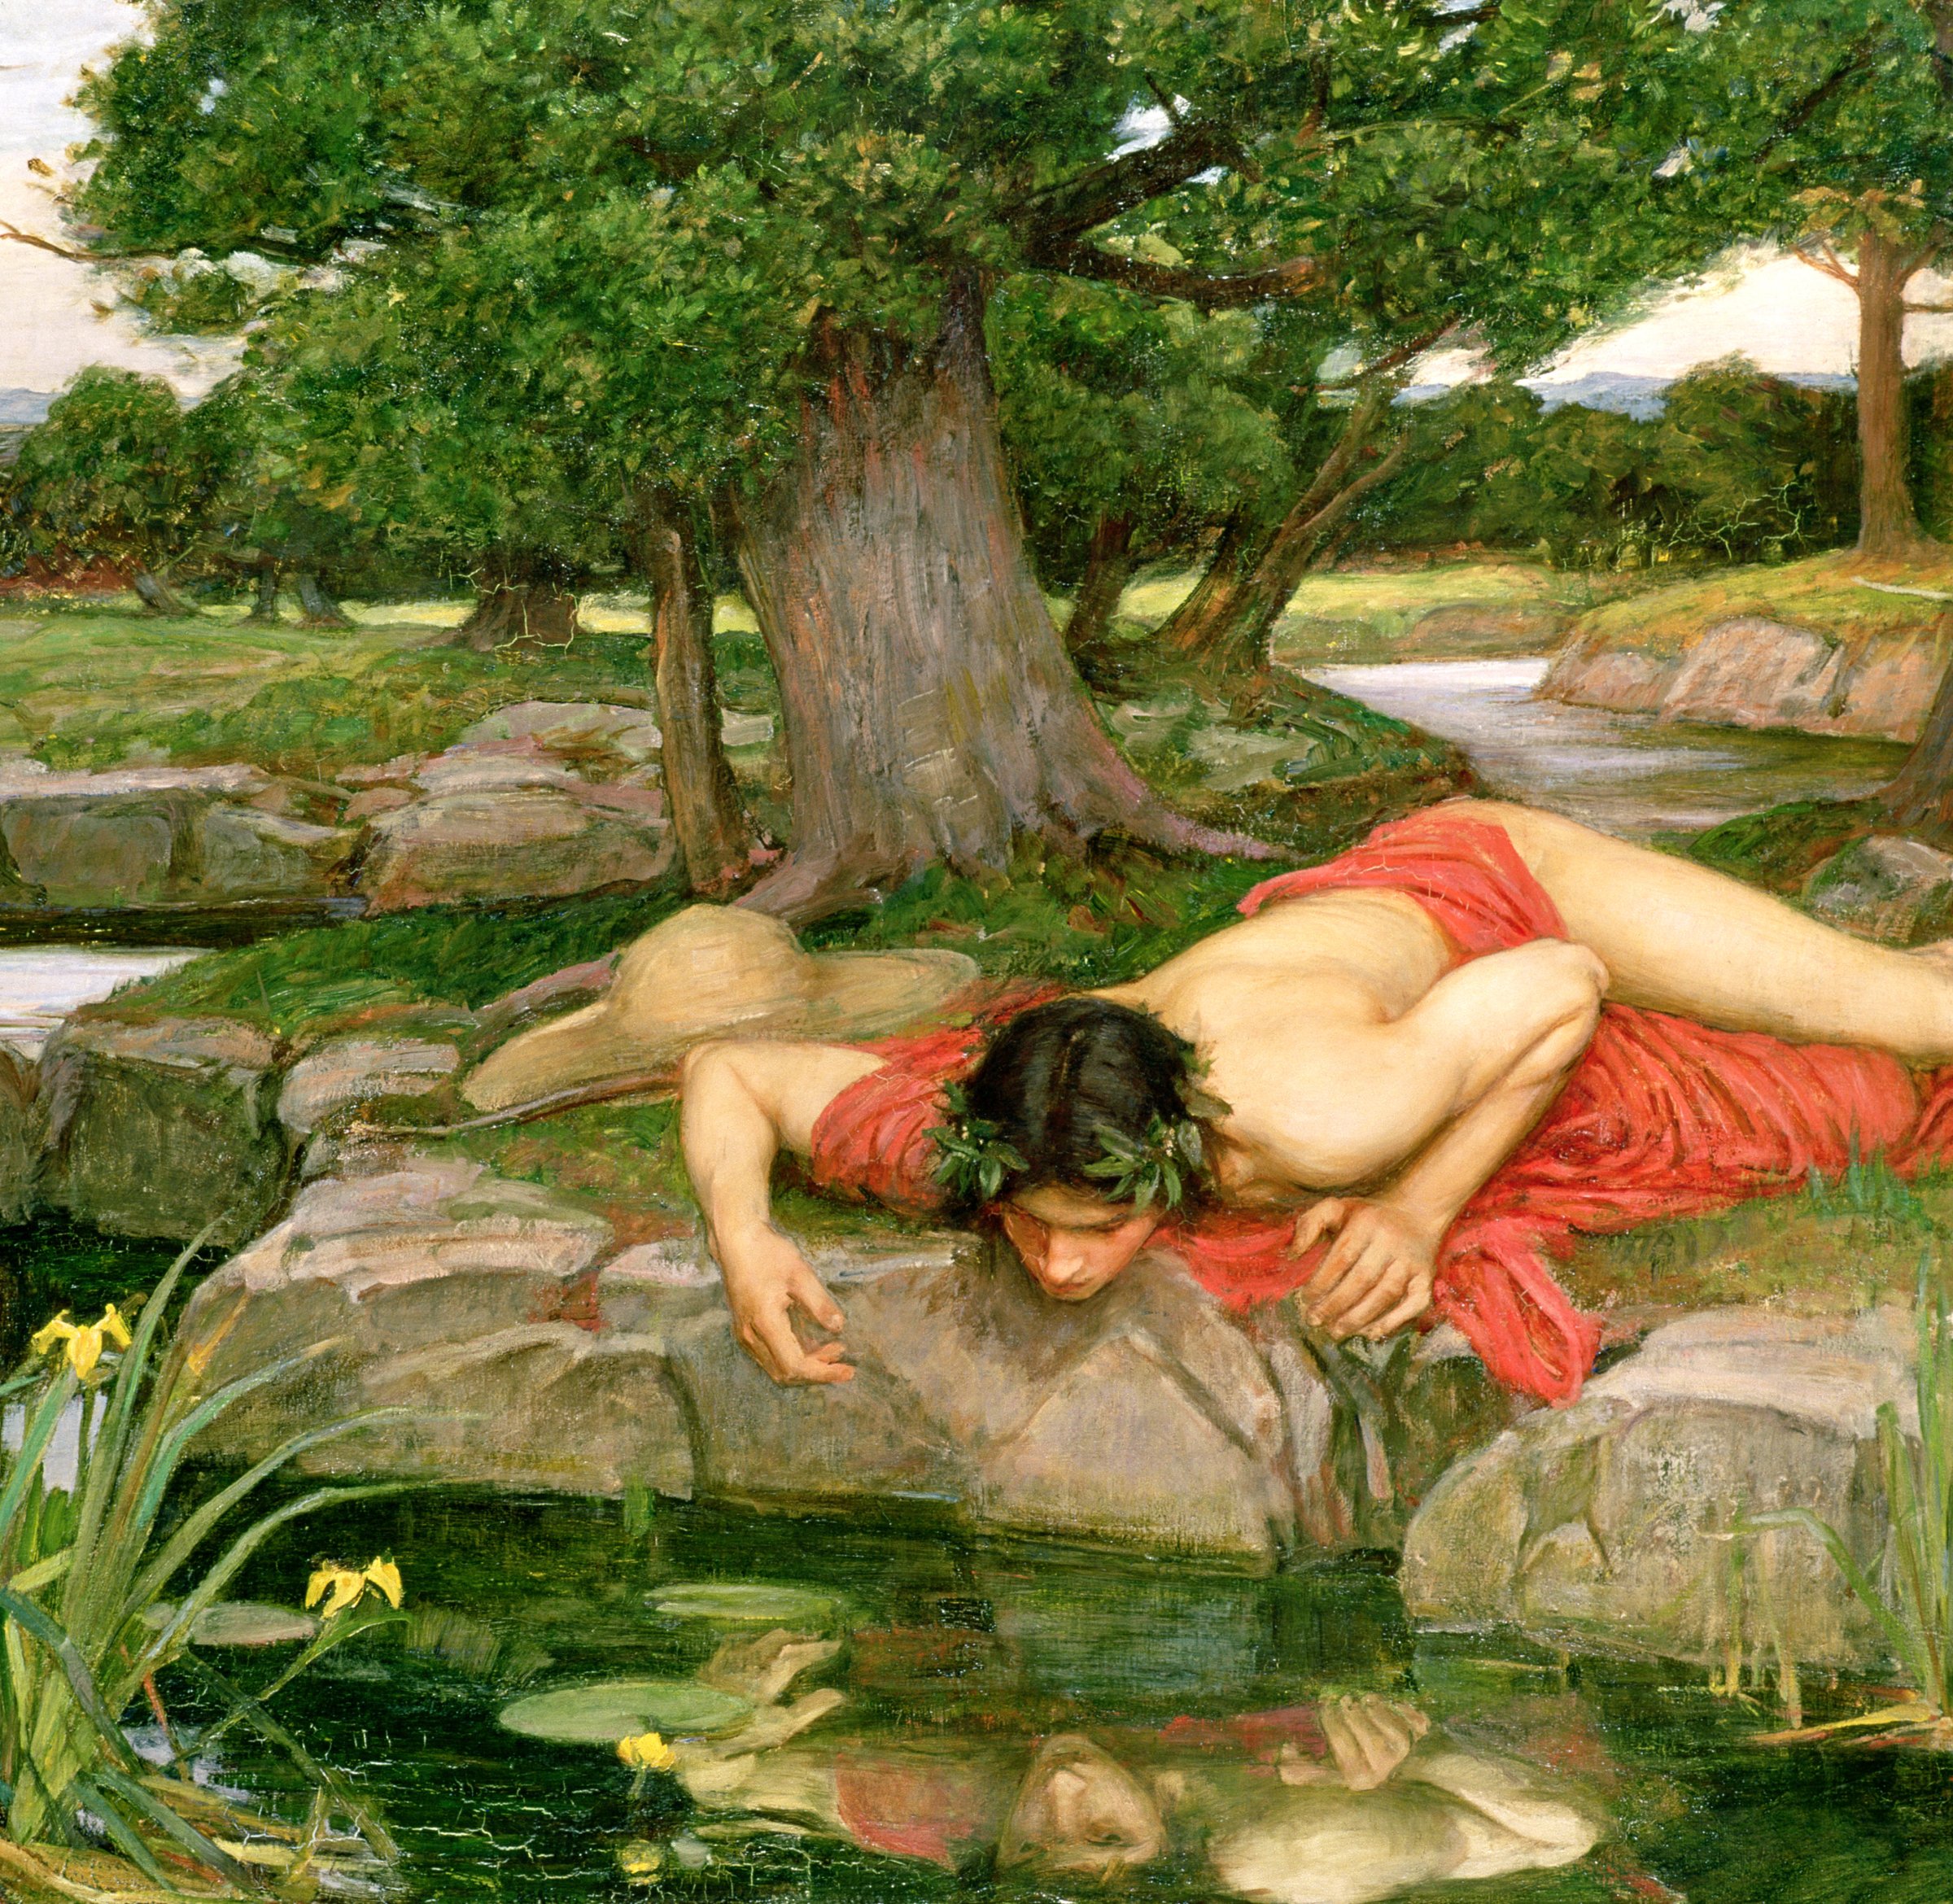 Like the view? The original Narcissus and his BFF